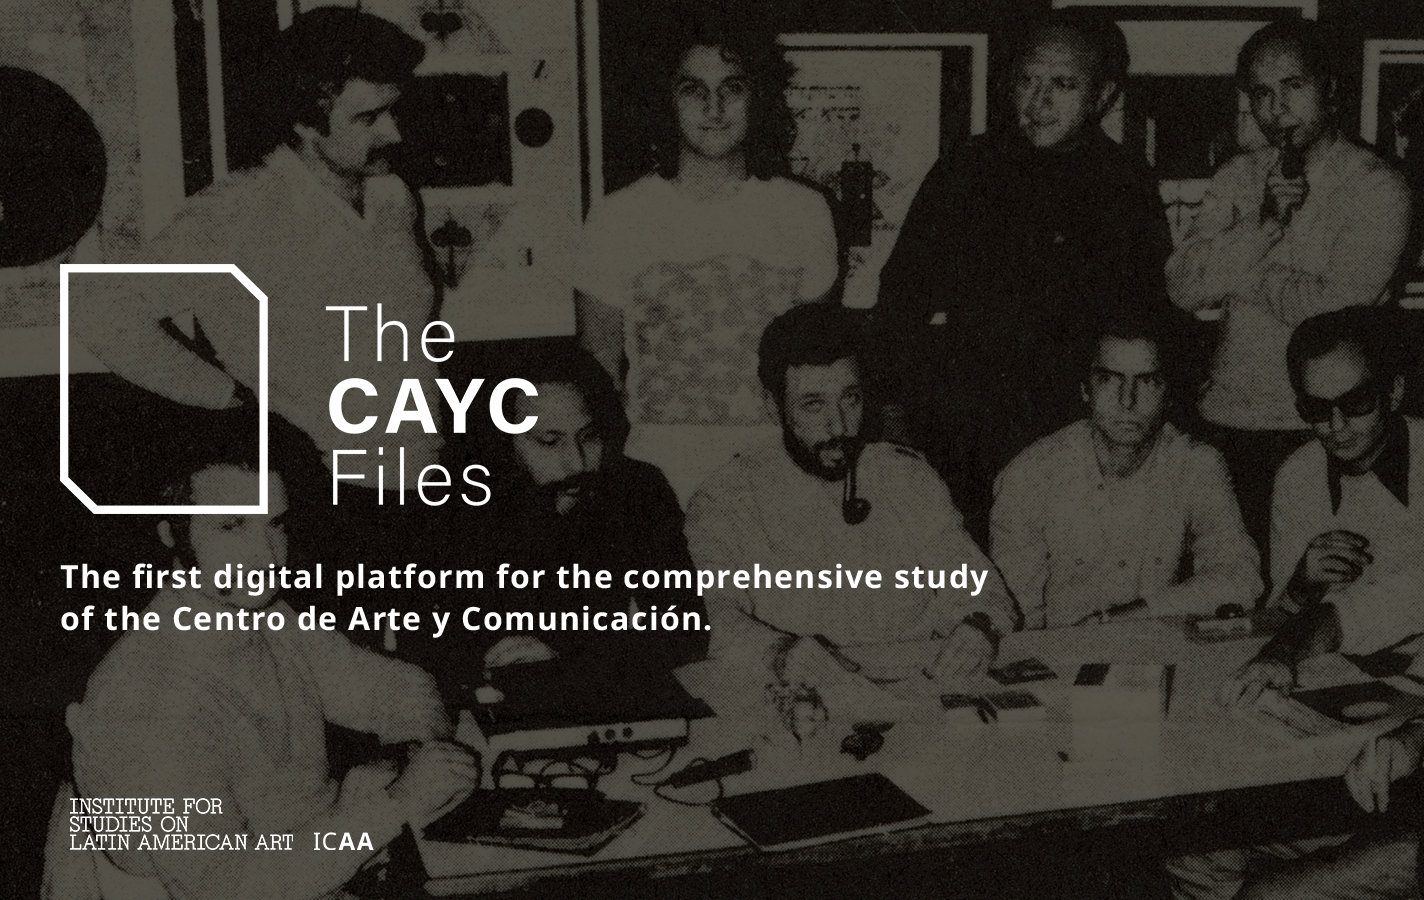 <p><strong>The CAYC Files:&nbsp;An ICAA/MFAH and ISLAA Collaboration</strong></p>
